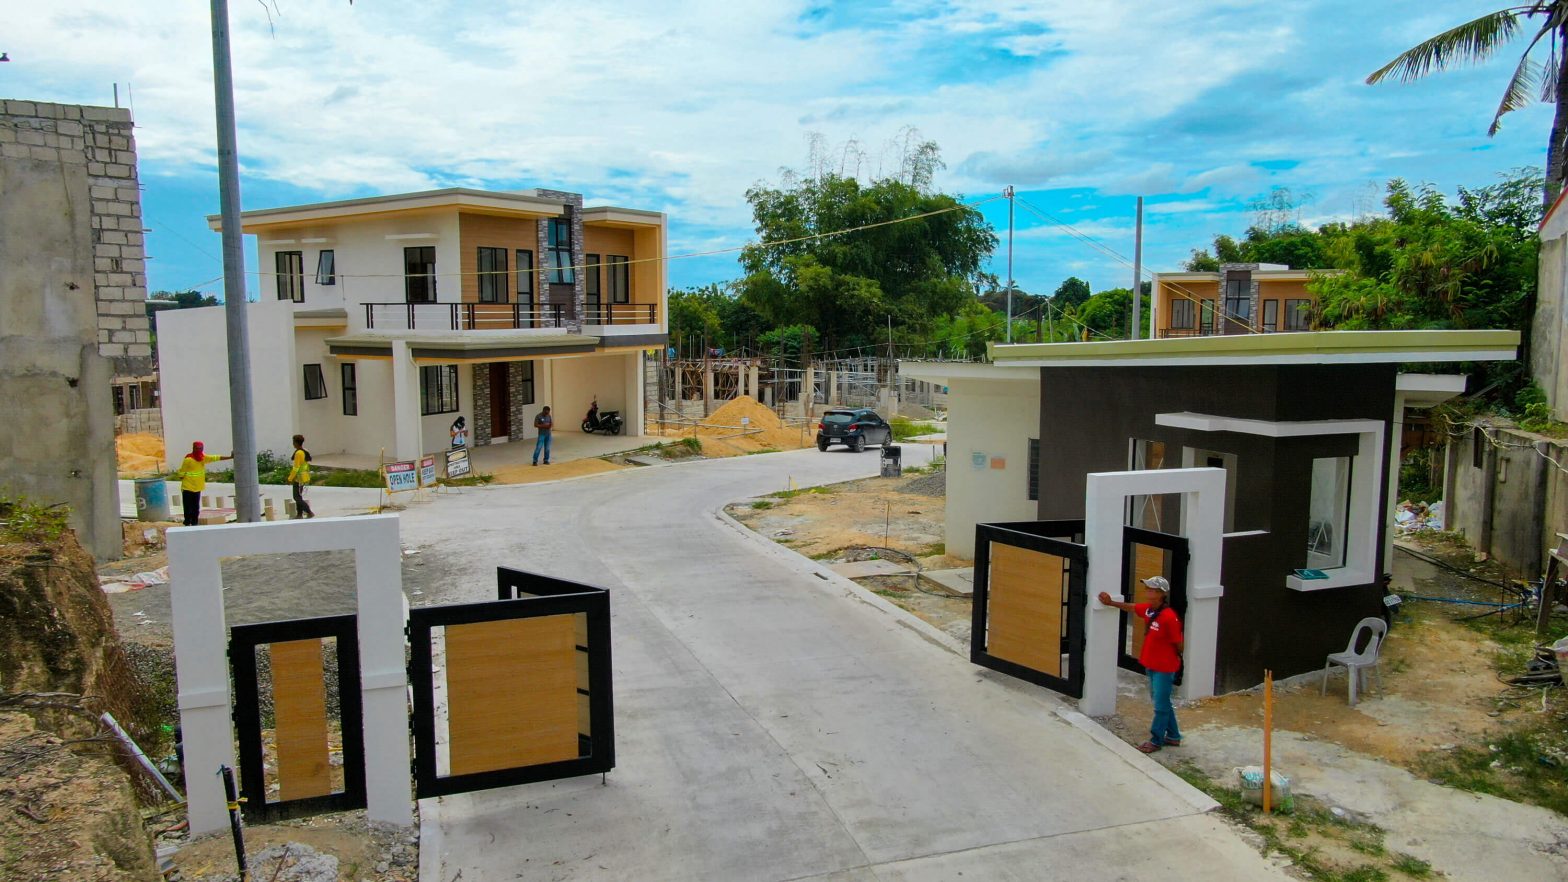 Belize North construction in full swing amid pandemic